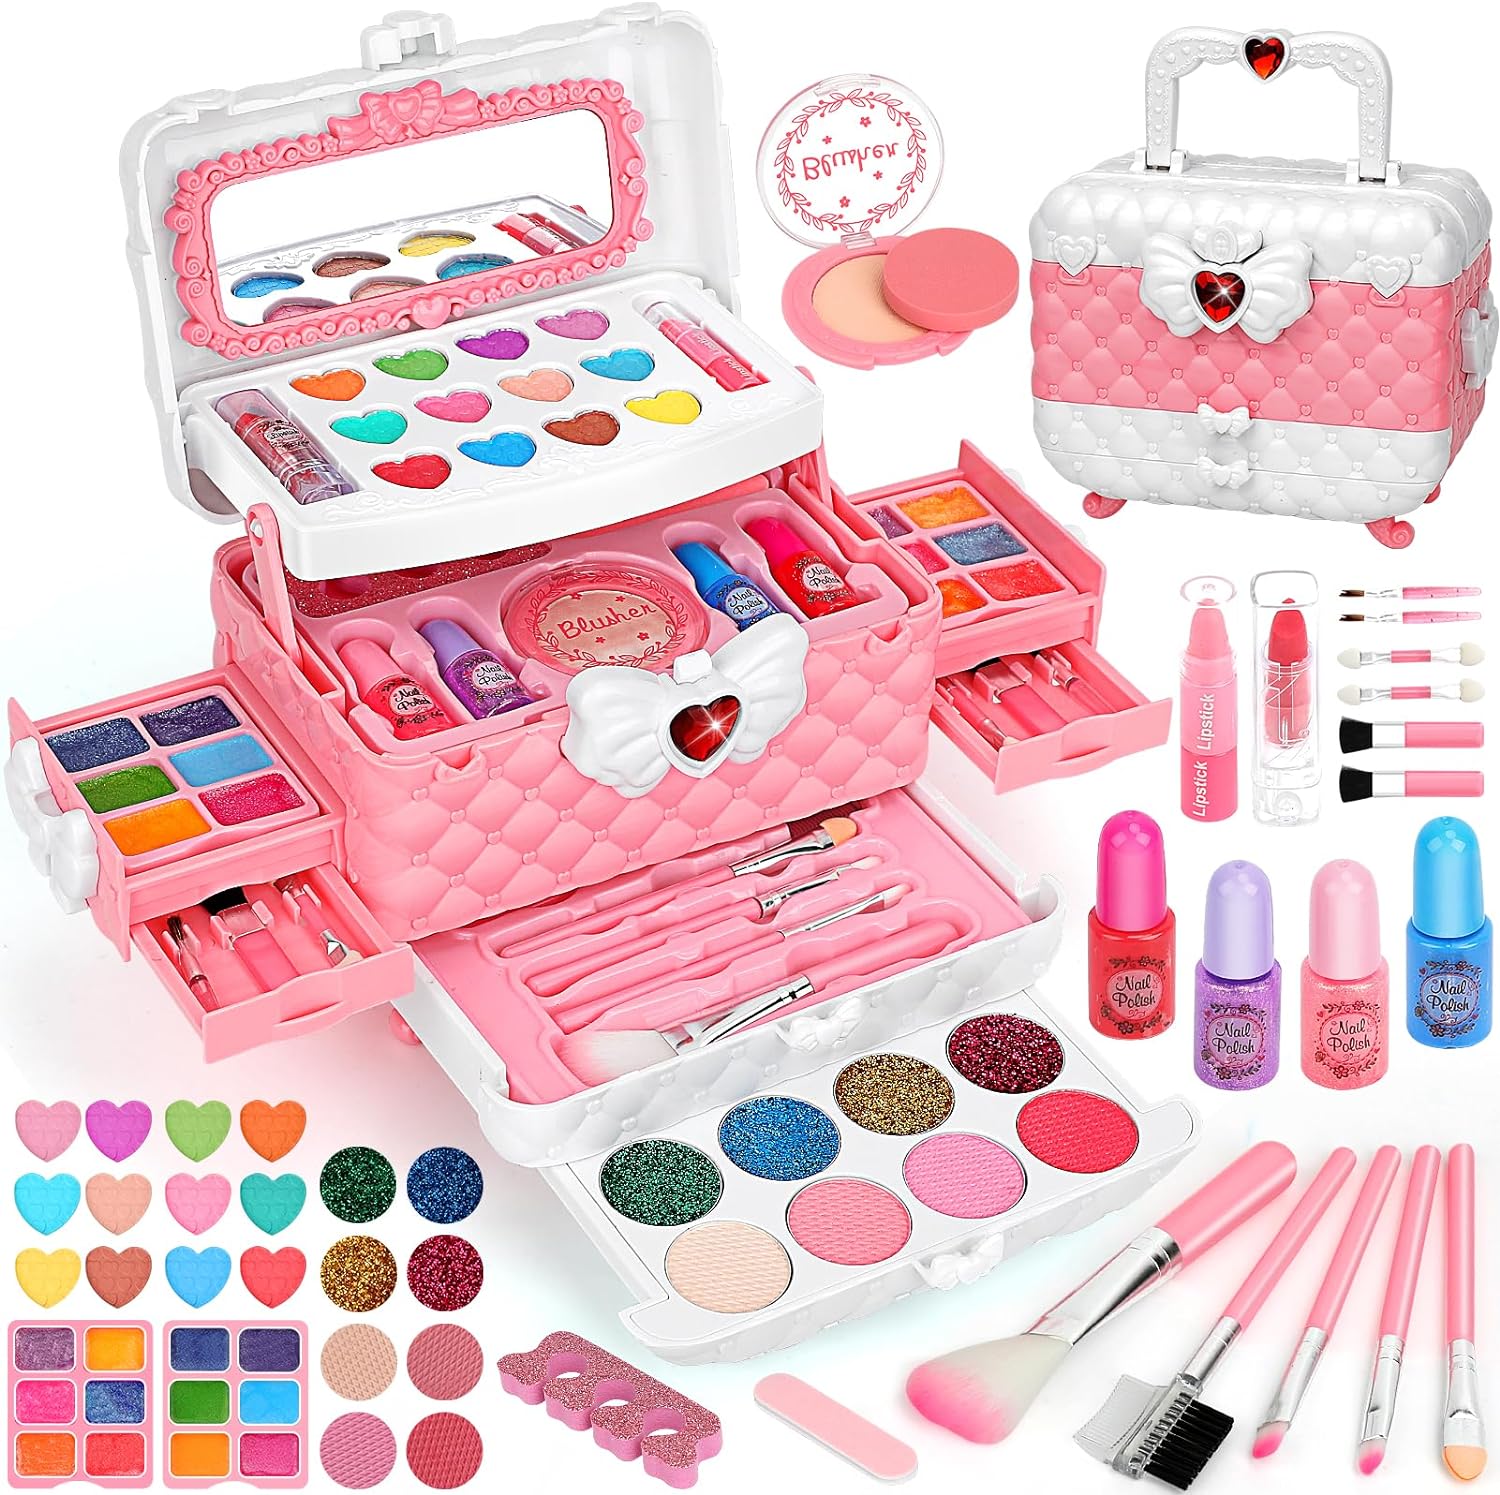 You are currently viewing Washable Kids Makeup Kit Review